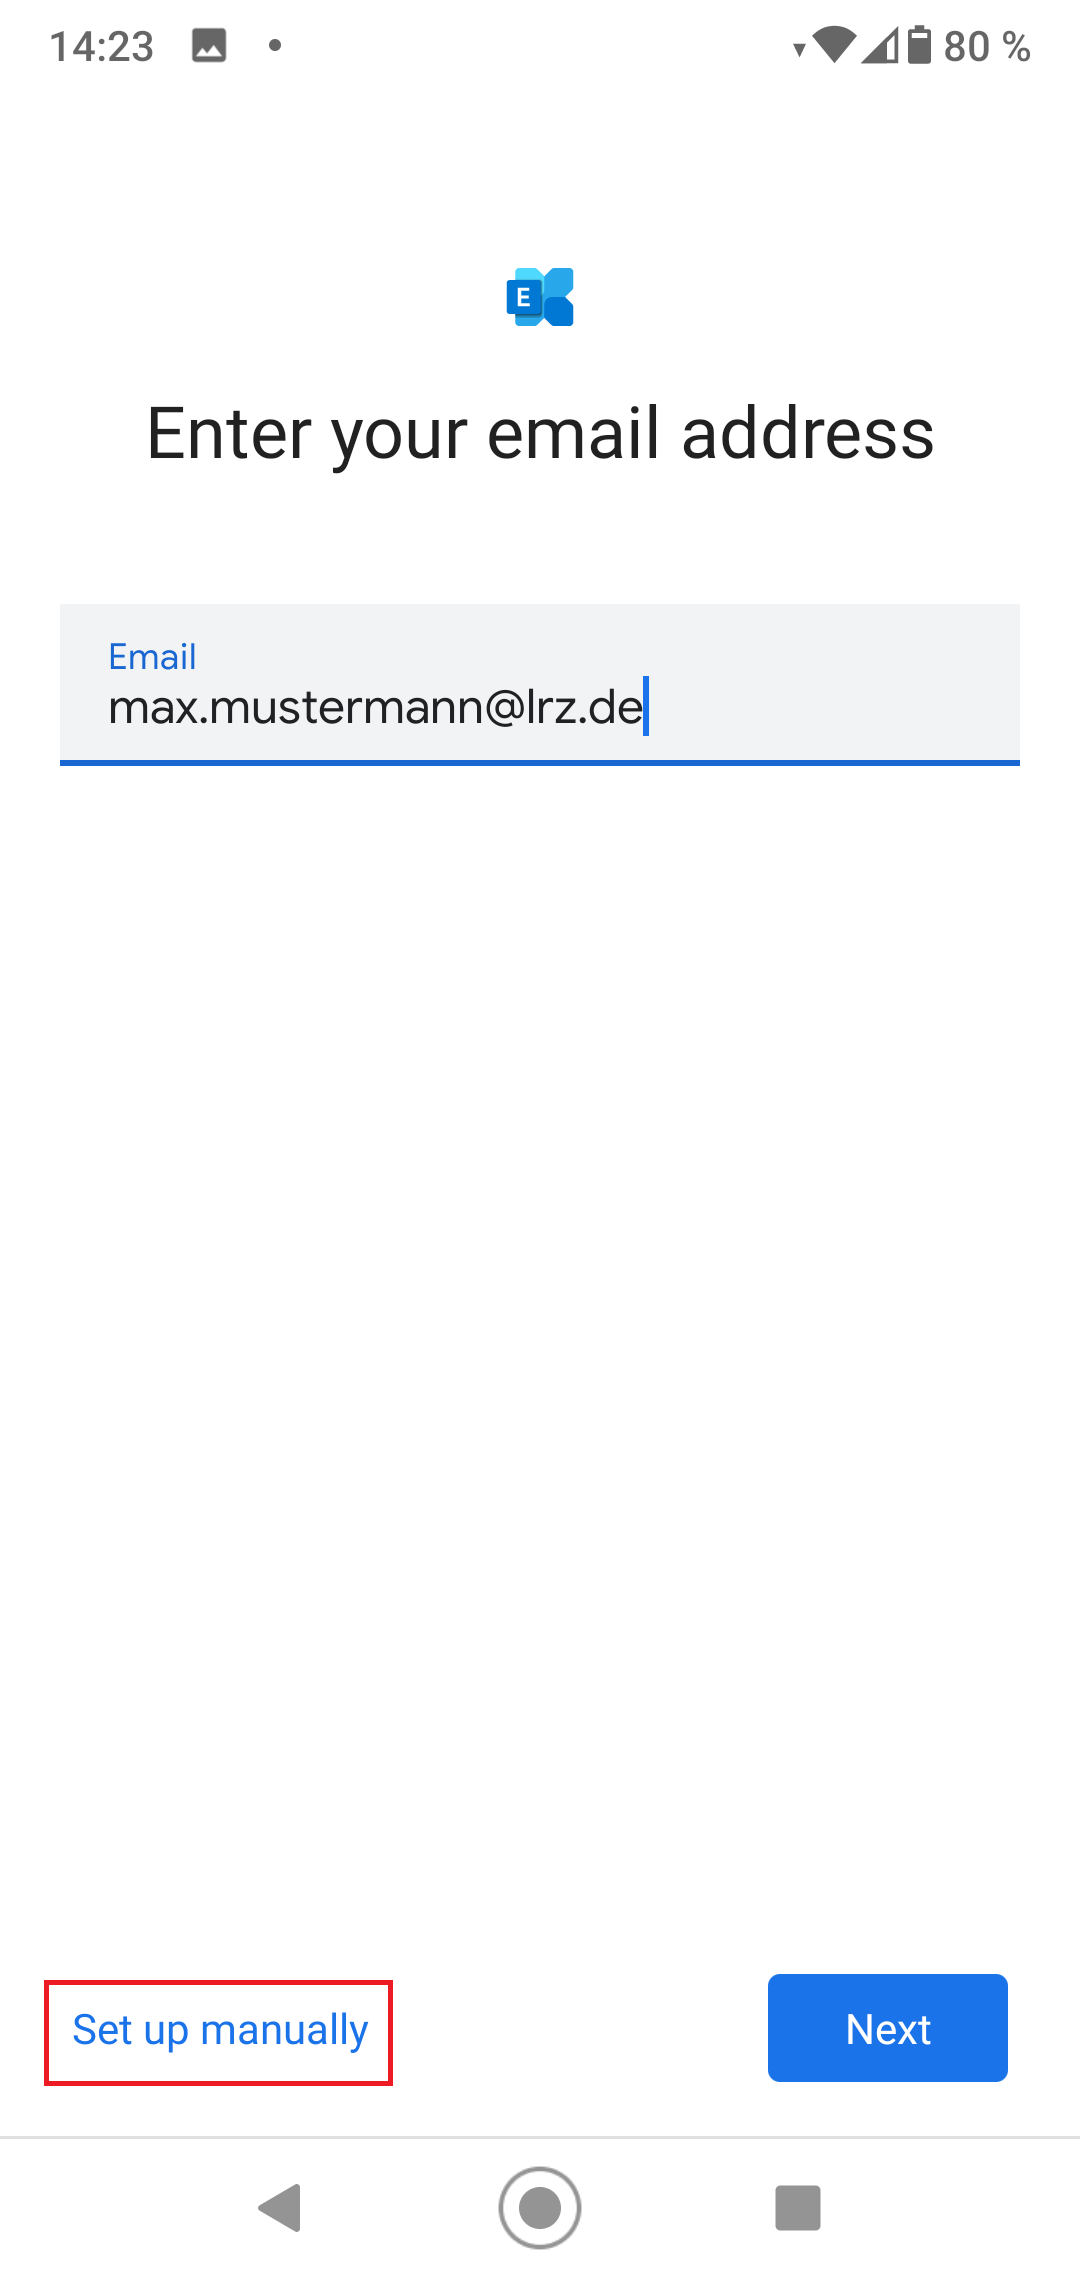 Exchange logo. Enter your email address. Email. Input field max.mustermann At lrz.de. At the bottom left selected button, Set up manually, right, Next button.